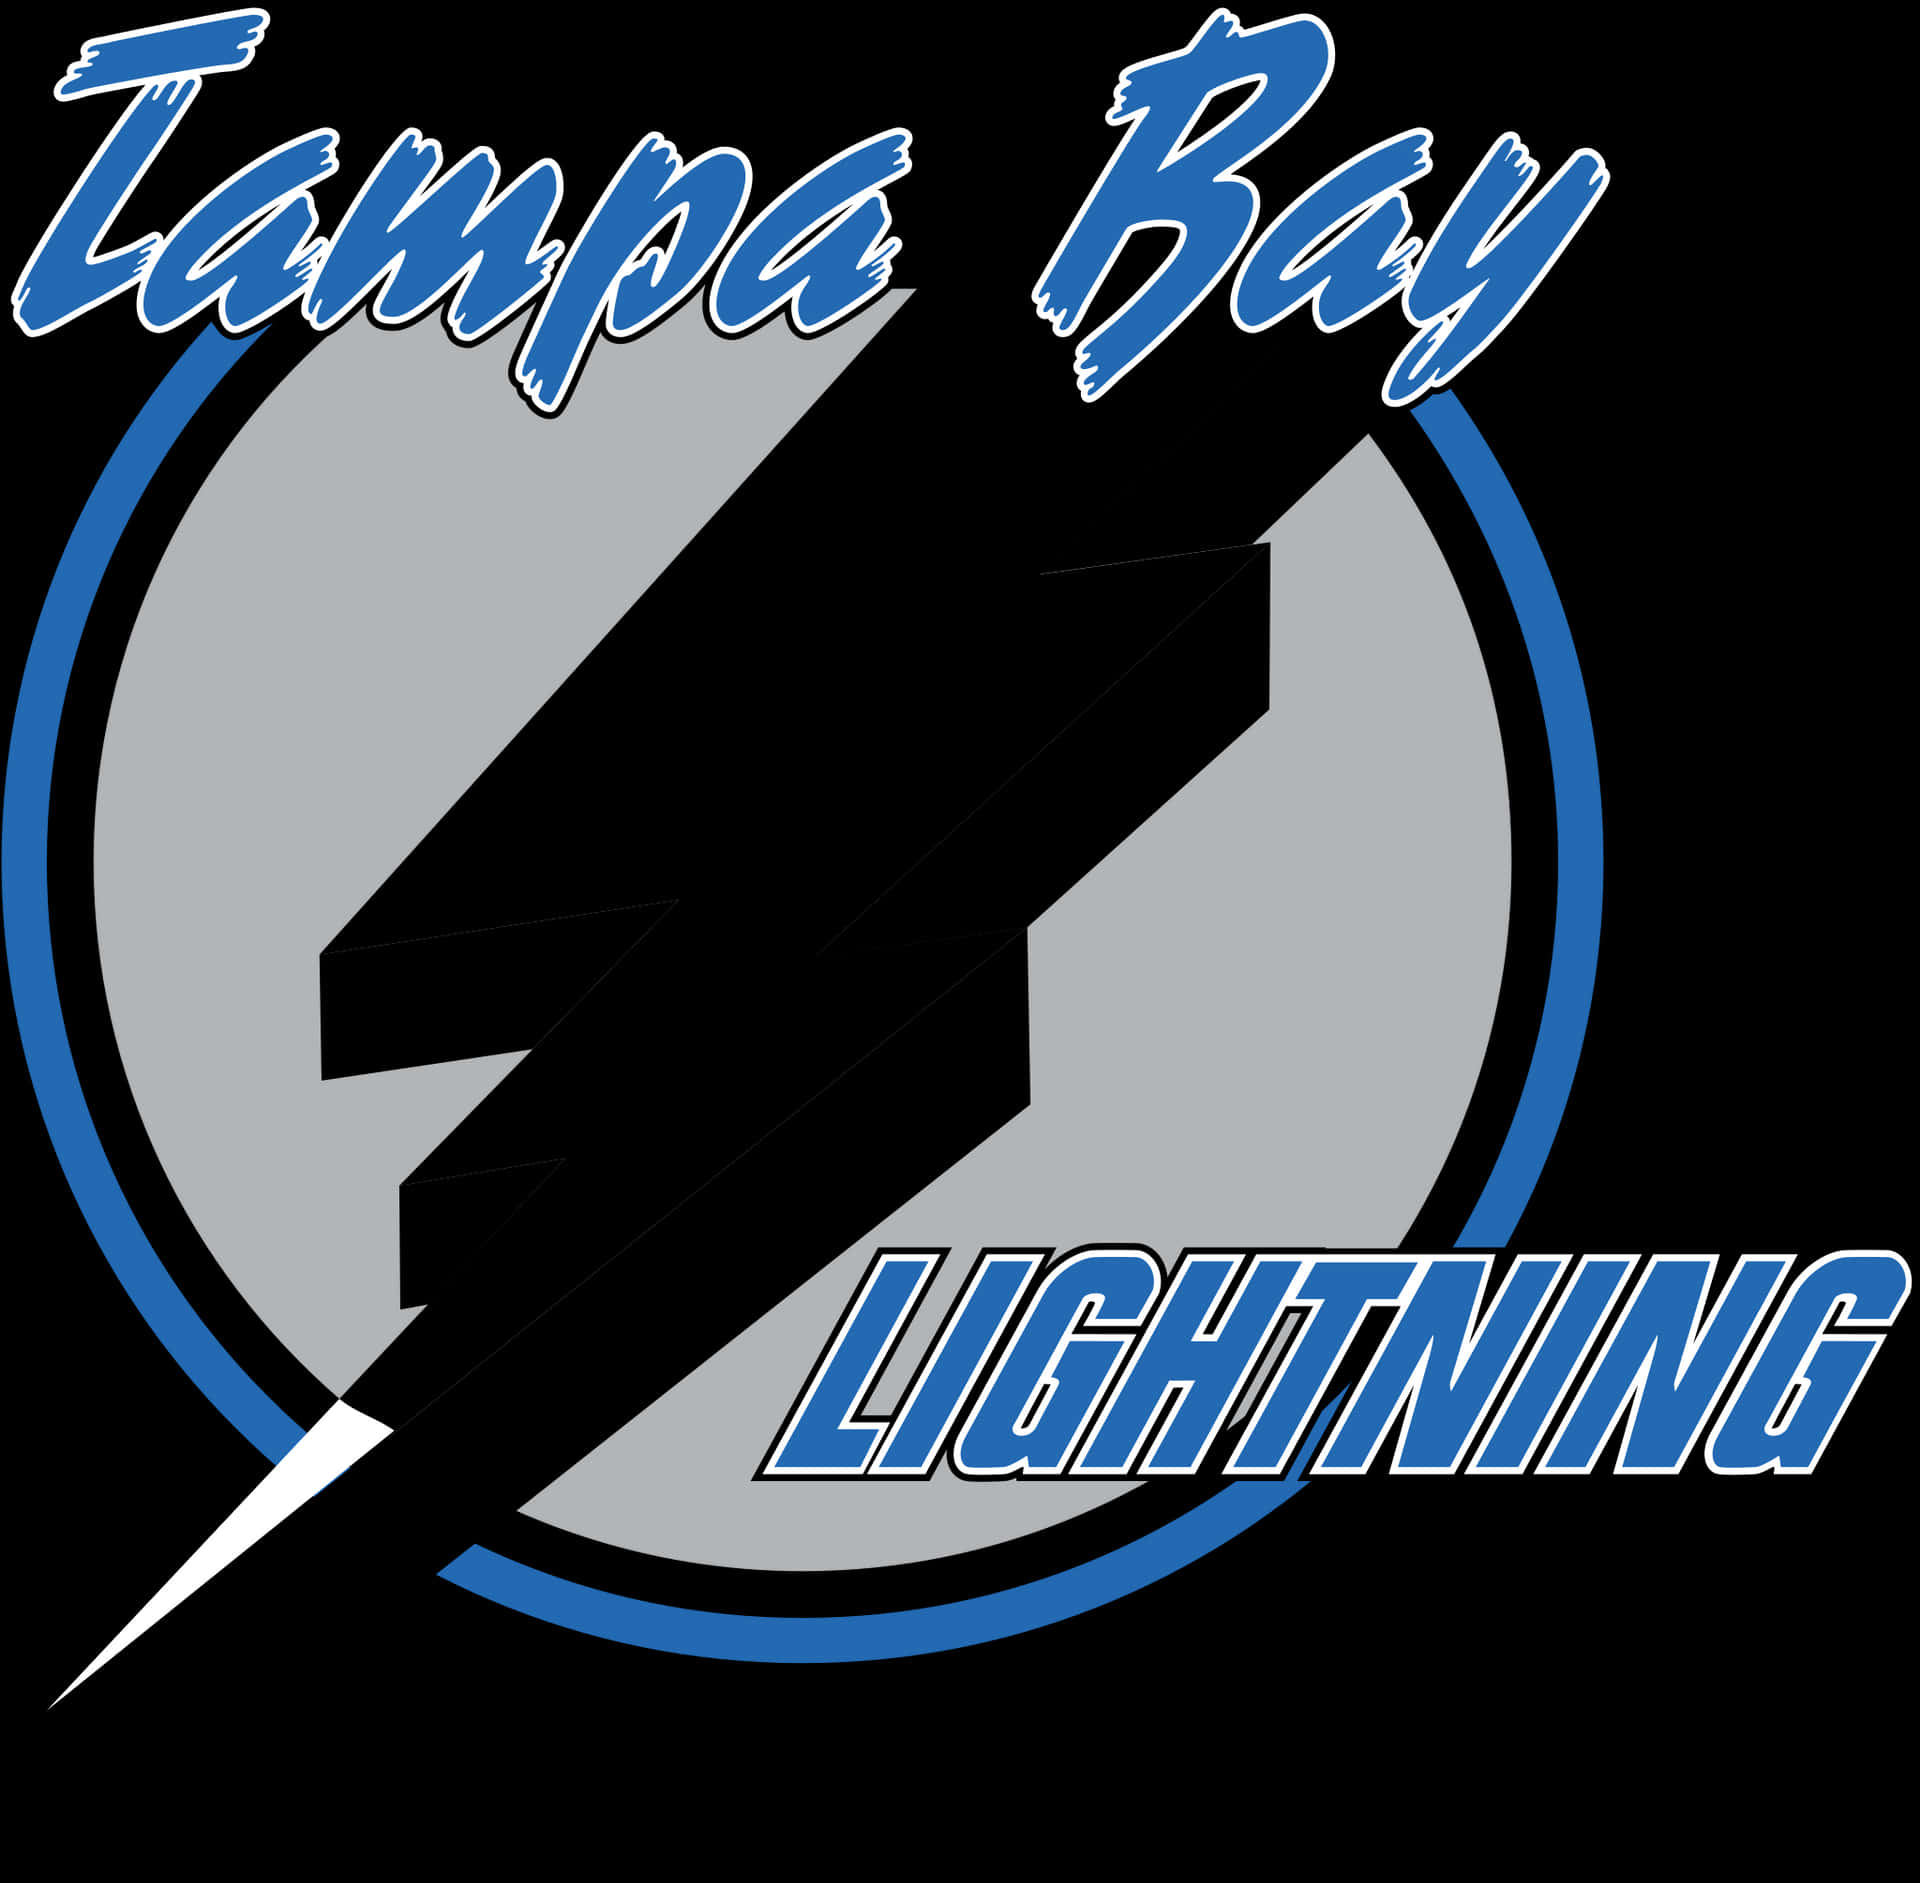 A Logo With A Lightning Bolt In A Circle PNG